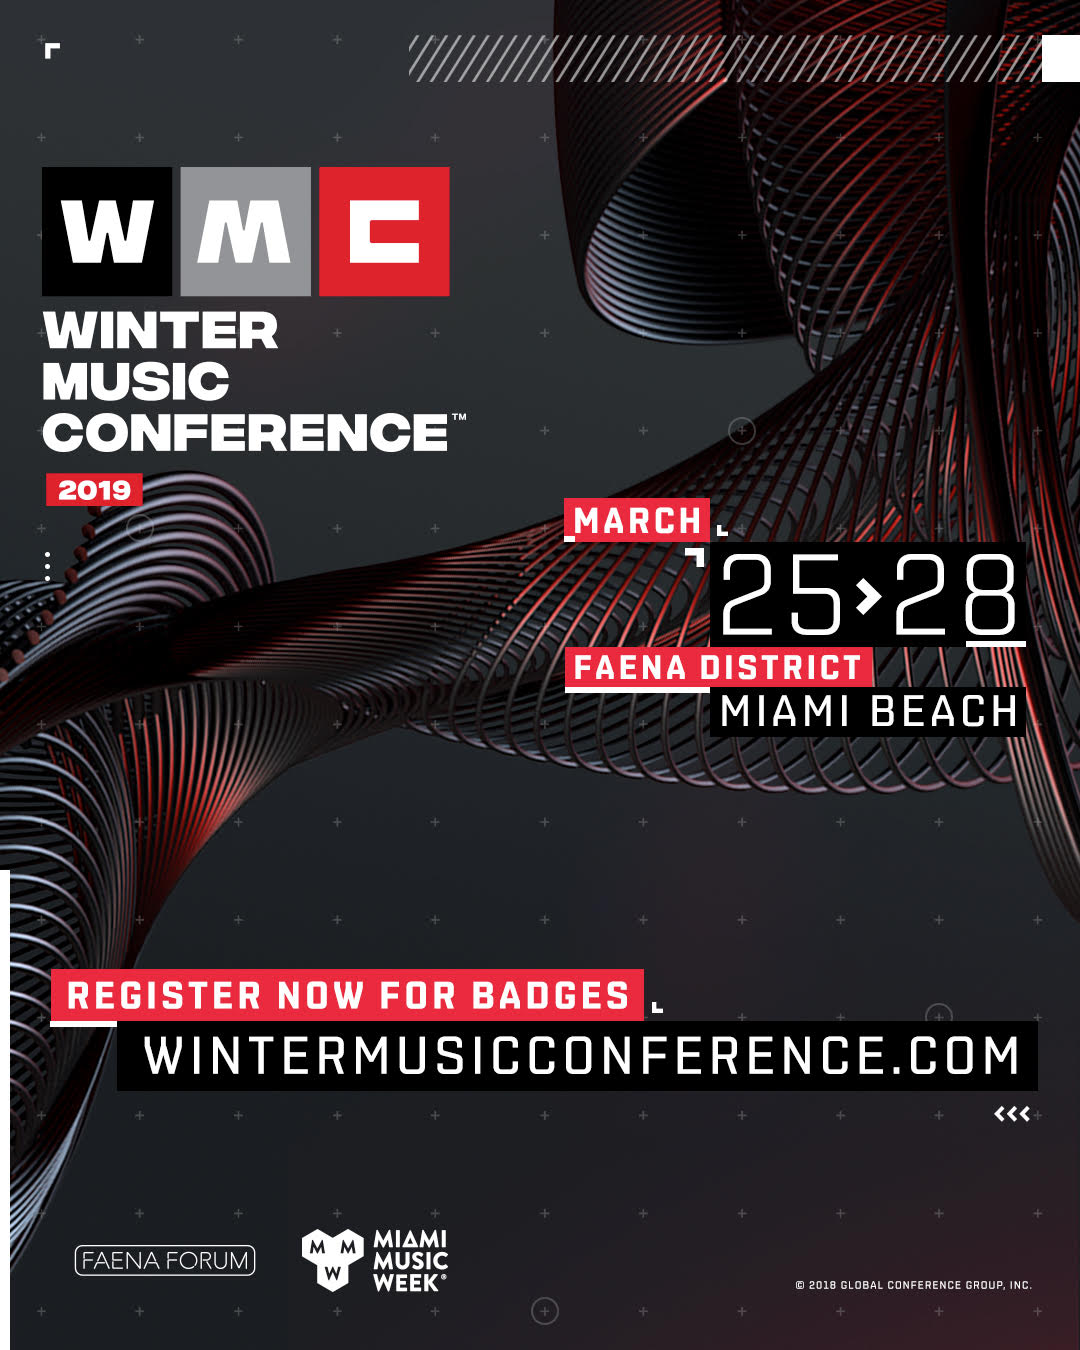 Register Now For The 34th Annual Winter Music Conference In Miami!